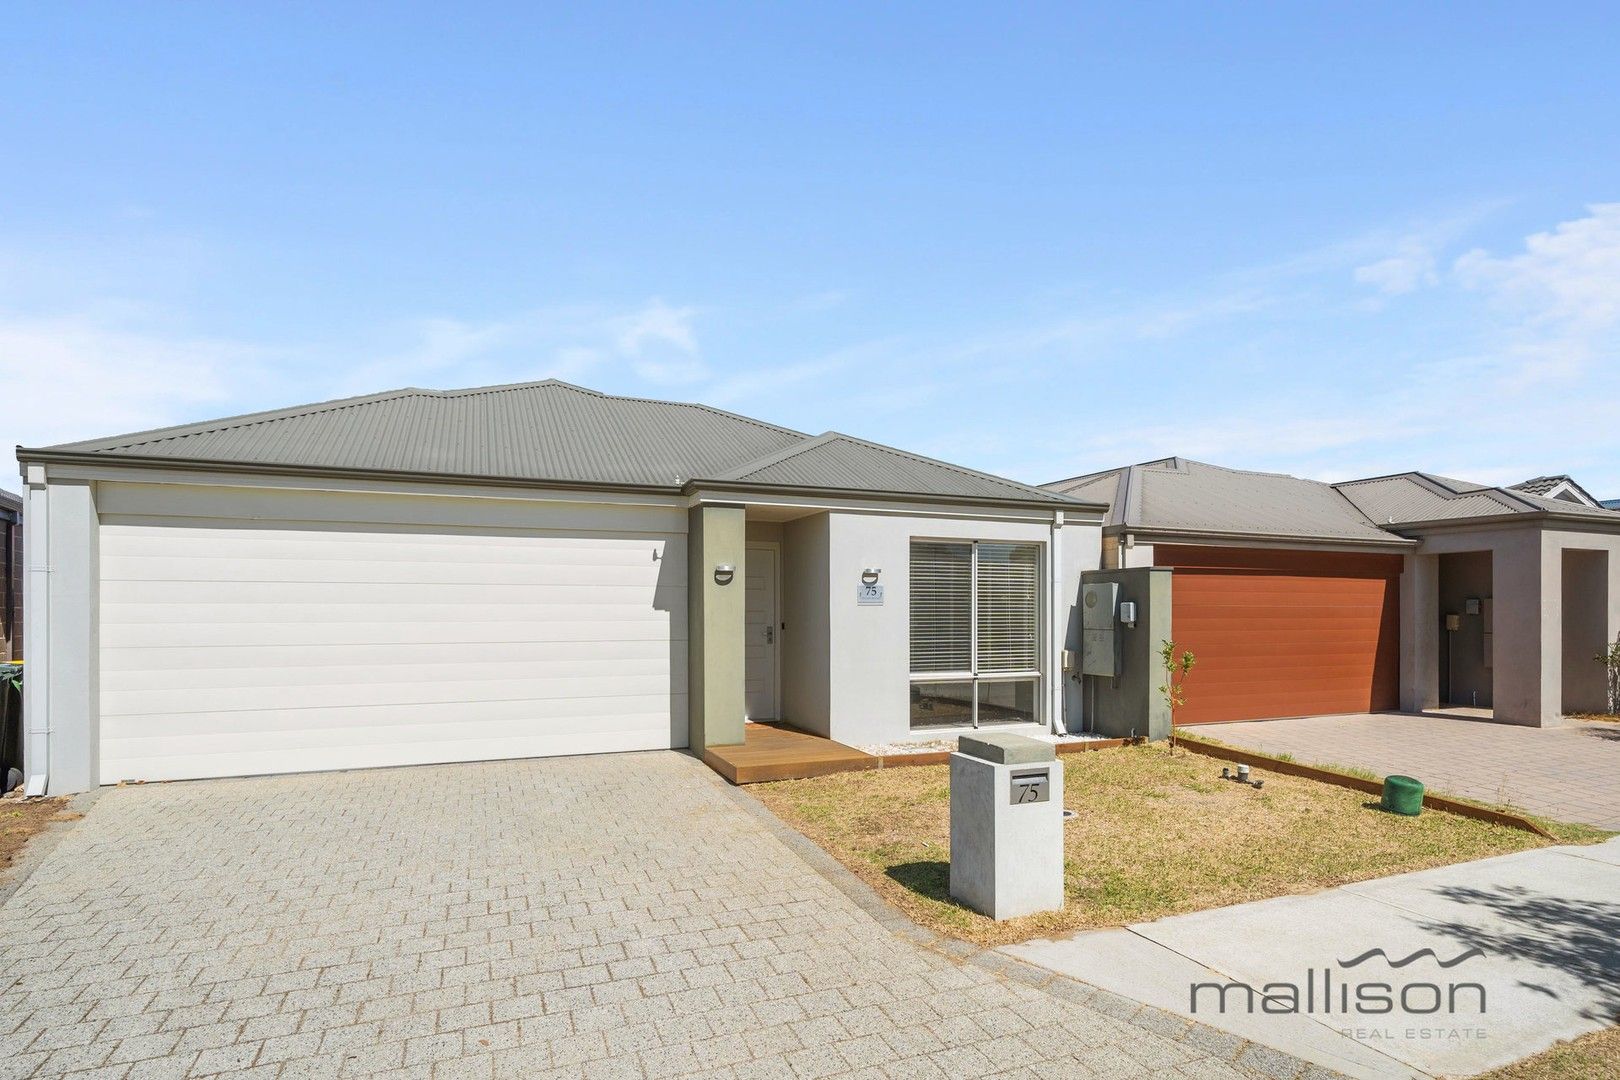 3 bedrooms House in 75 Welcome Meander HARRISDALE WA, 6112